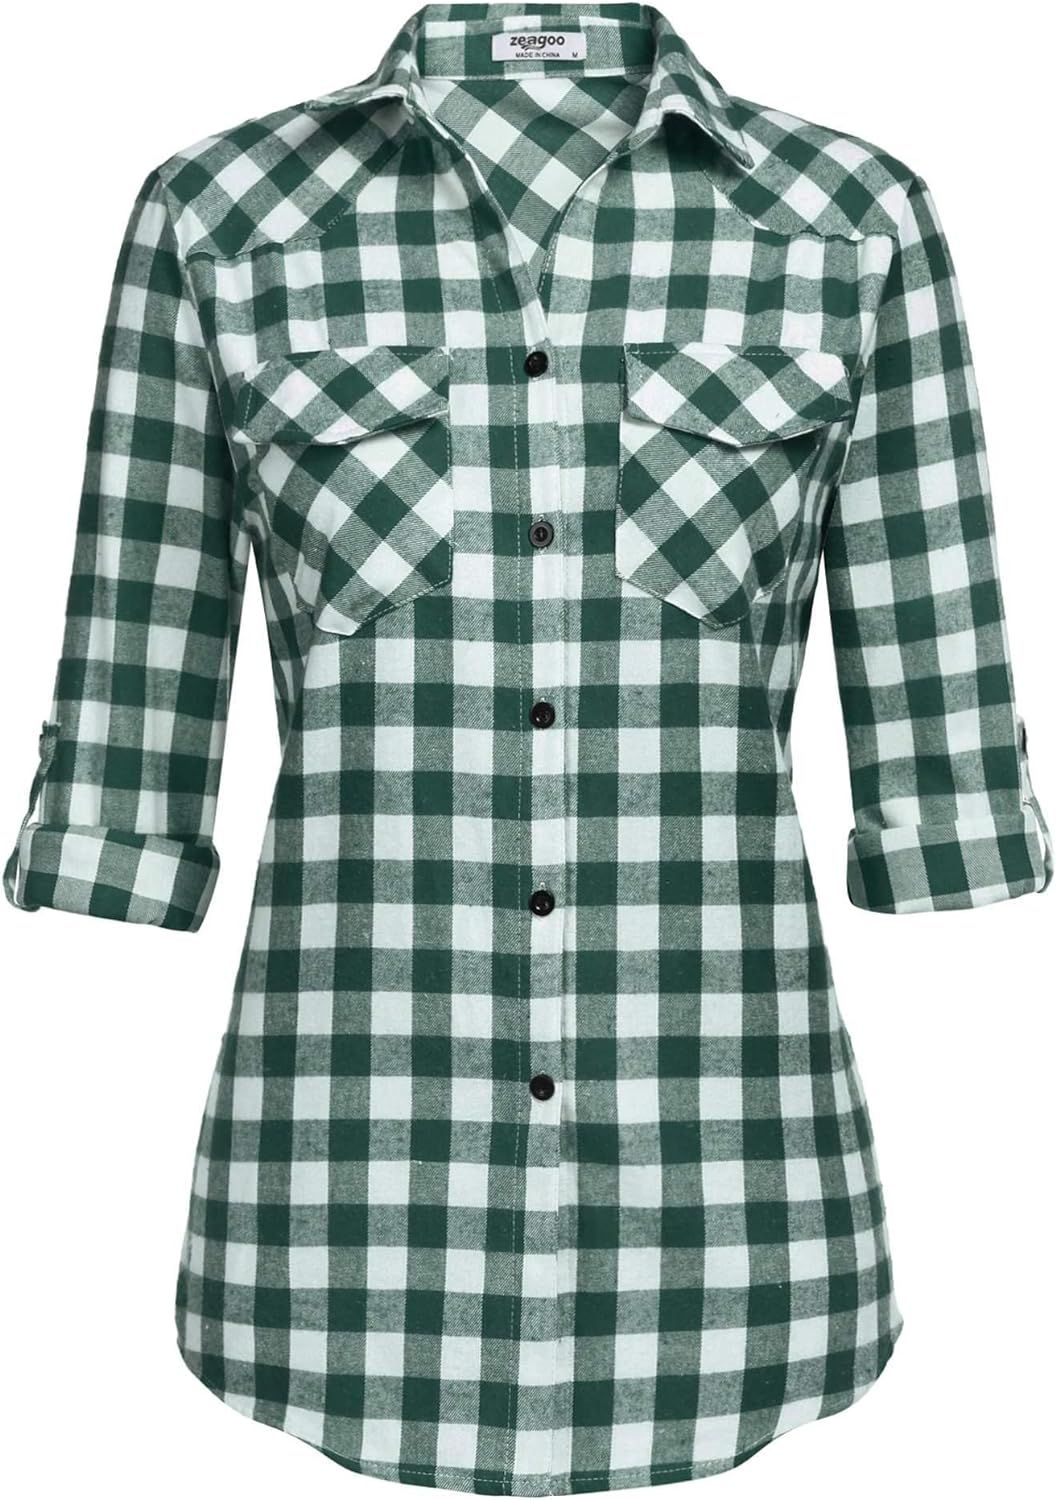 Zeagoo Womens Flannels Long/Roll Up Sleeve Plaid Shirts Cotton Check Gingham Top S-3XL | Amazon (US)